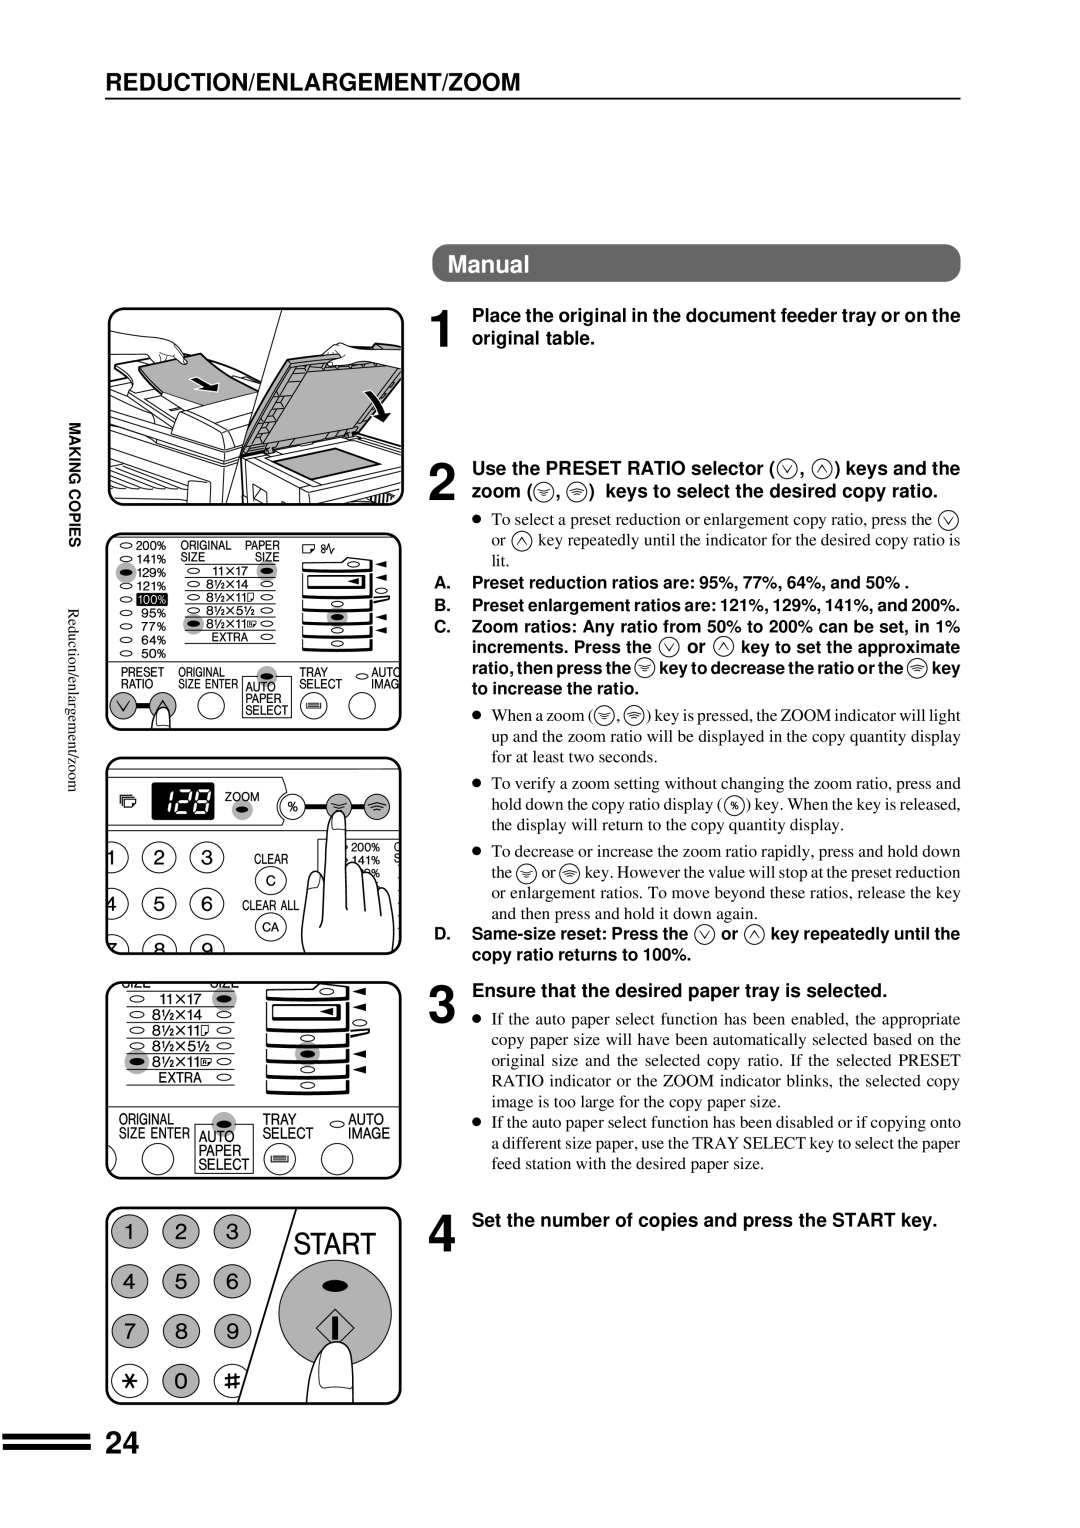 Sharp AR-207 operation manual Reduction/Enlargement/Zoom, Manual, Place the original in the document feeder tray or on the 